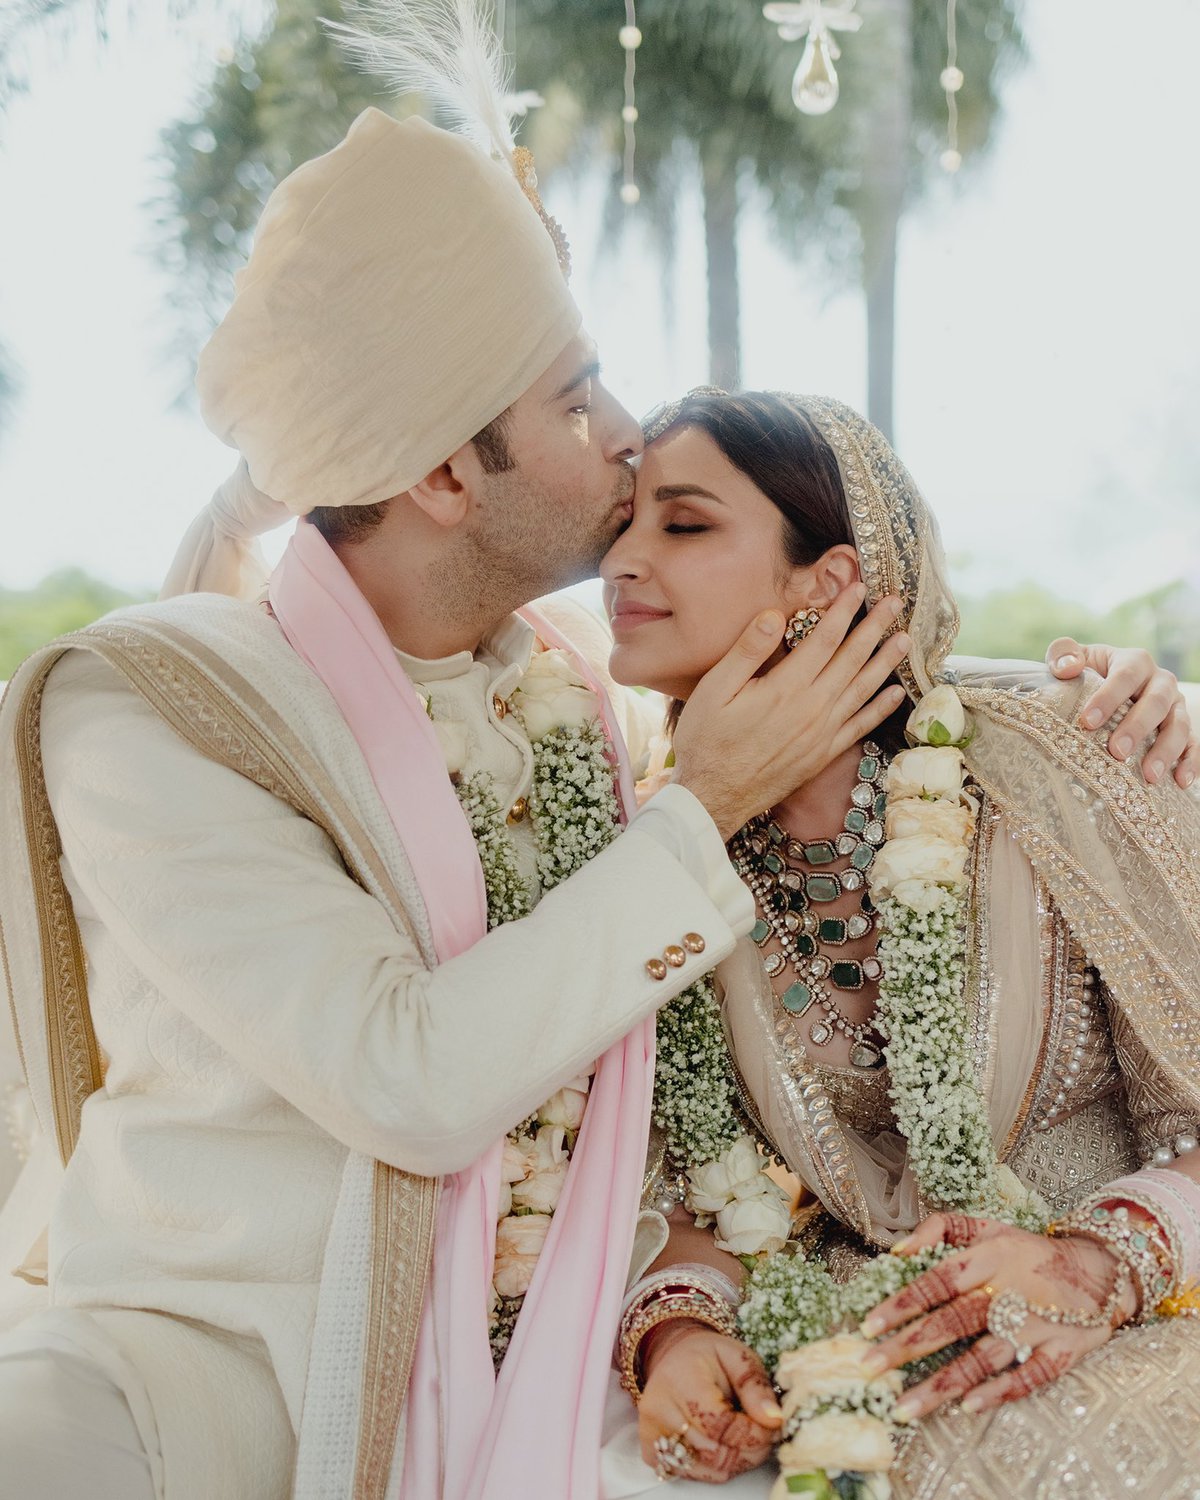 blessed to finally be mr and mrs first pictures from parineeti chopra raghav chadha wedding 4 – The News Mill